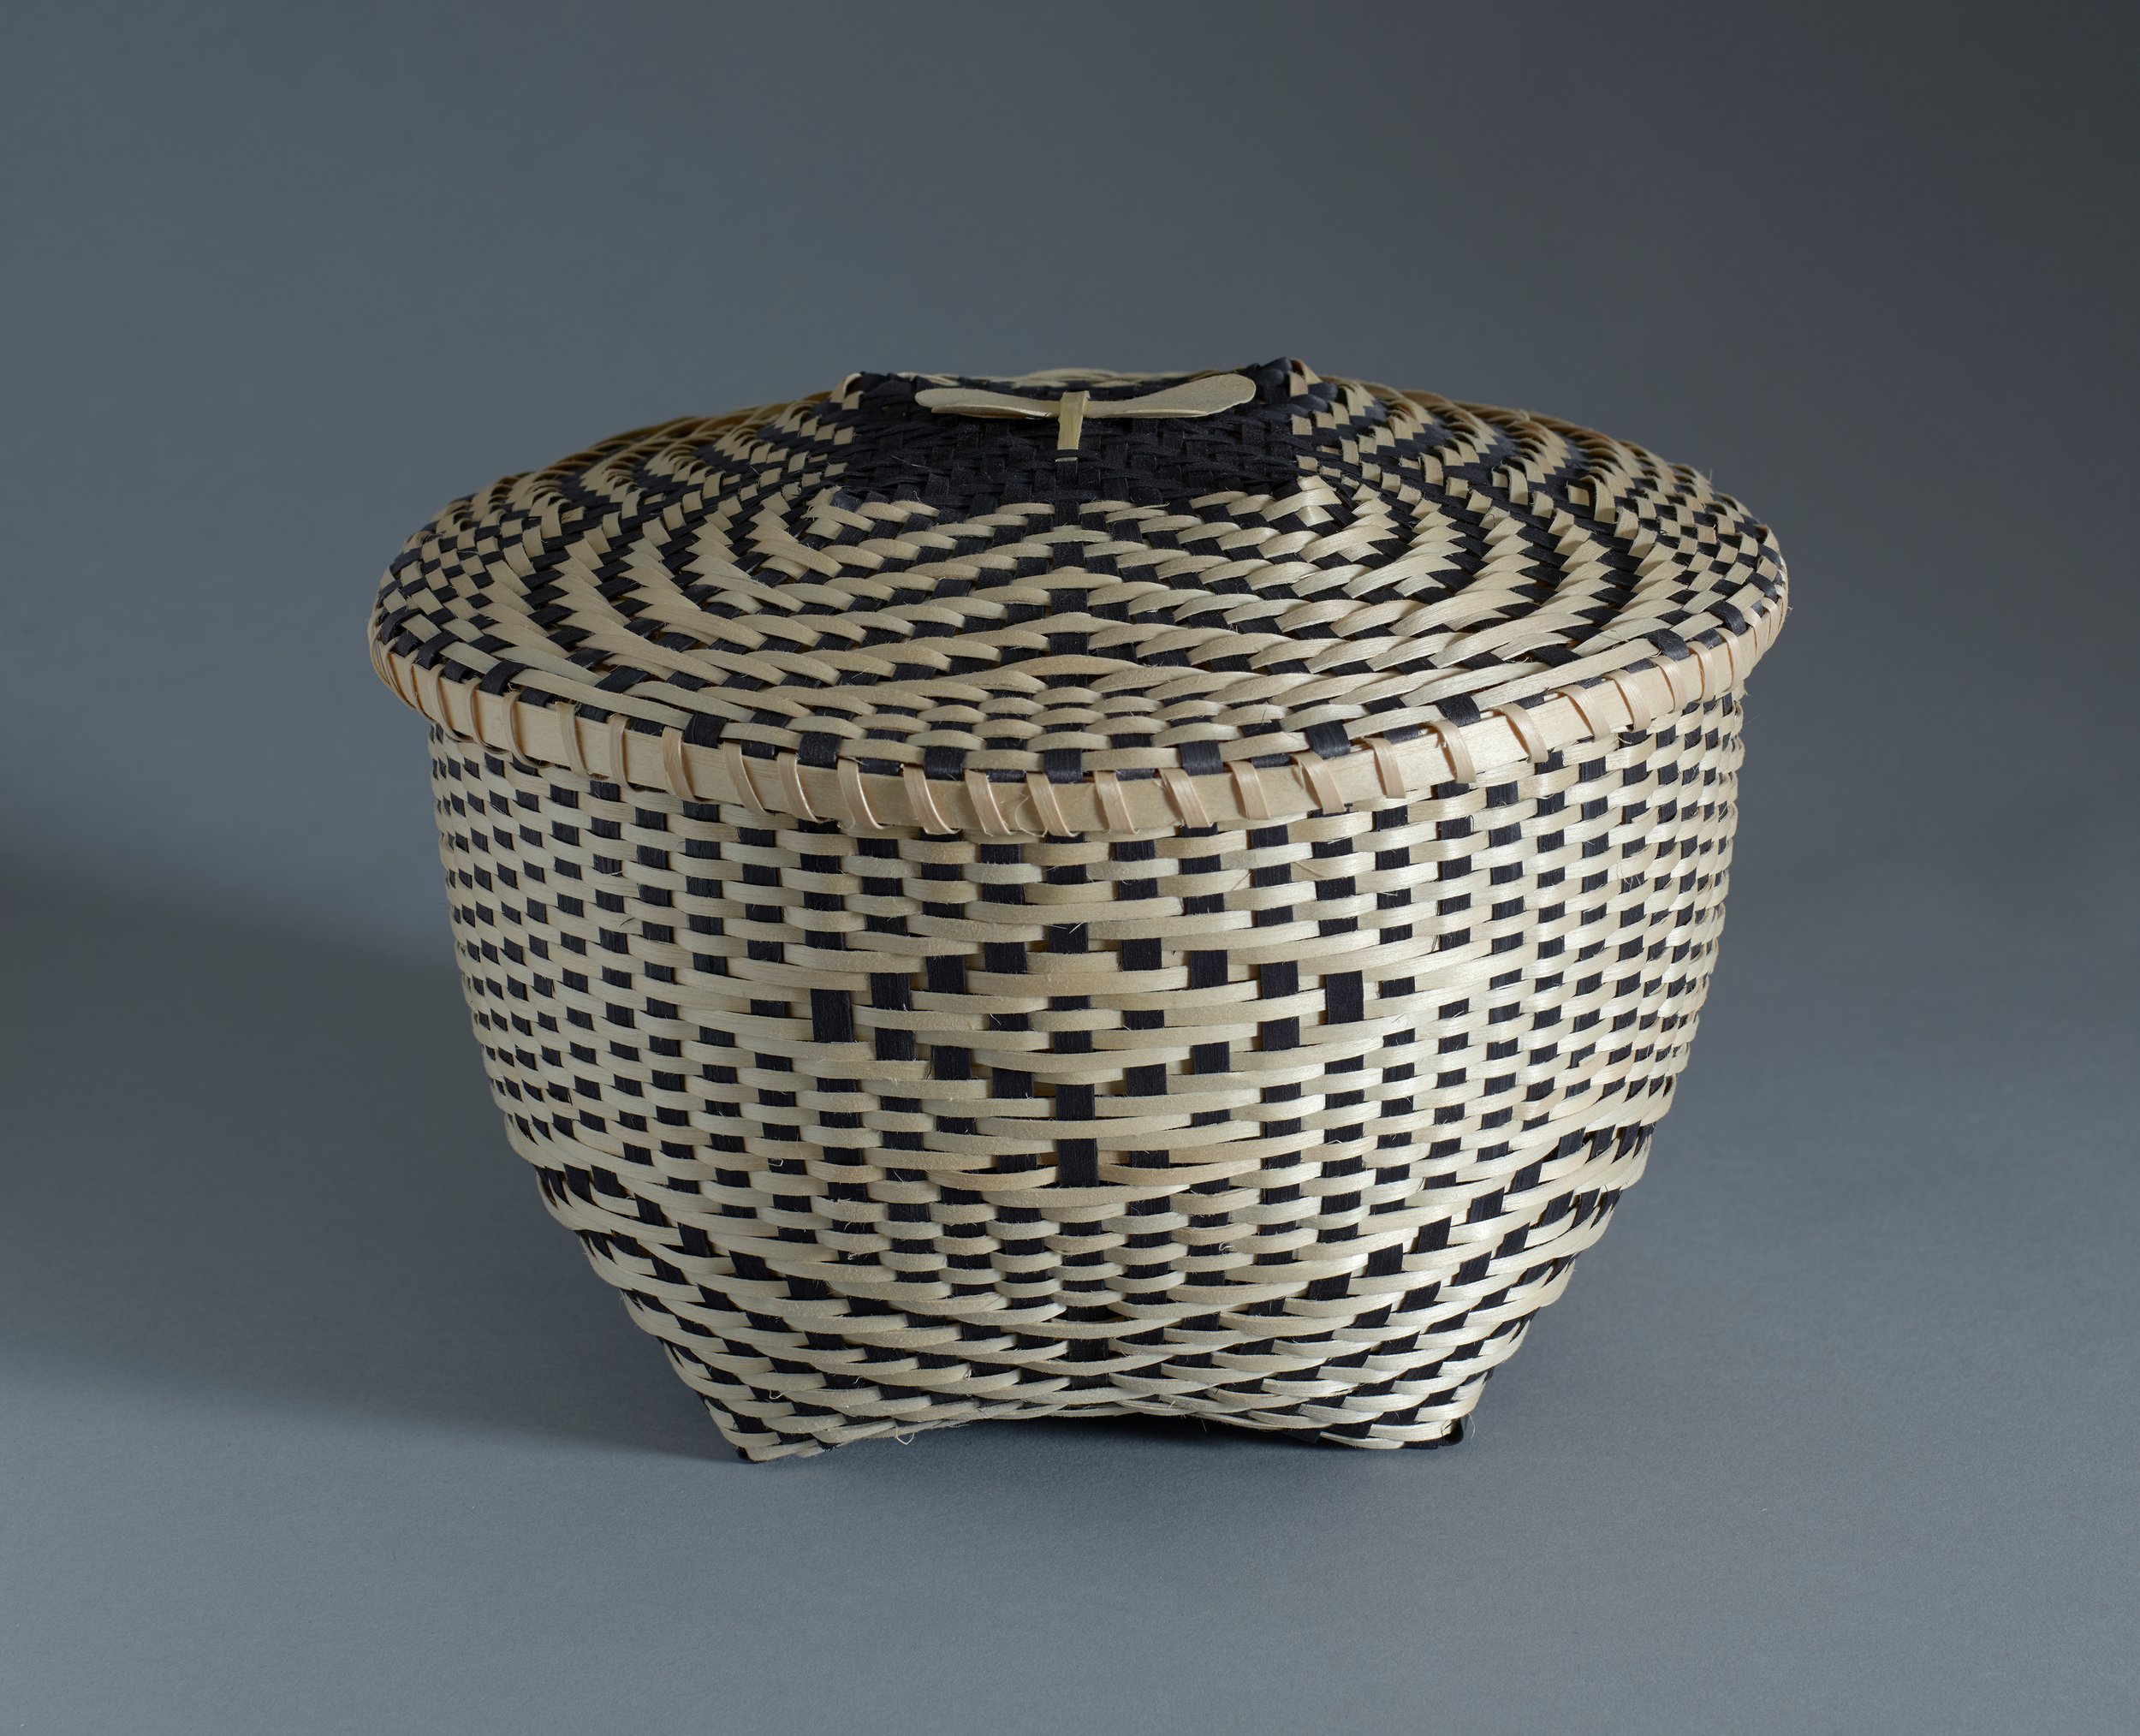  Fred Tomah (Maliseet, 1951–2018),  Arctic Katahdin butterfly basket,  circa 2010,     black ash, sweetgrass, and dye, 7 3/4 x 10 1/2 x 10 1/4 inches. Portland Museum of Art, Maine. Gift of Barbara M. Goodbody, 2021.19.14a,b. Image courtesy Luc Demer